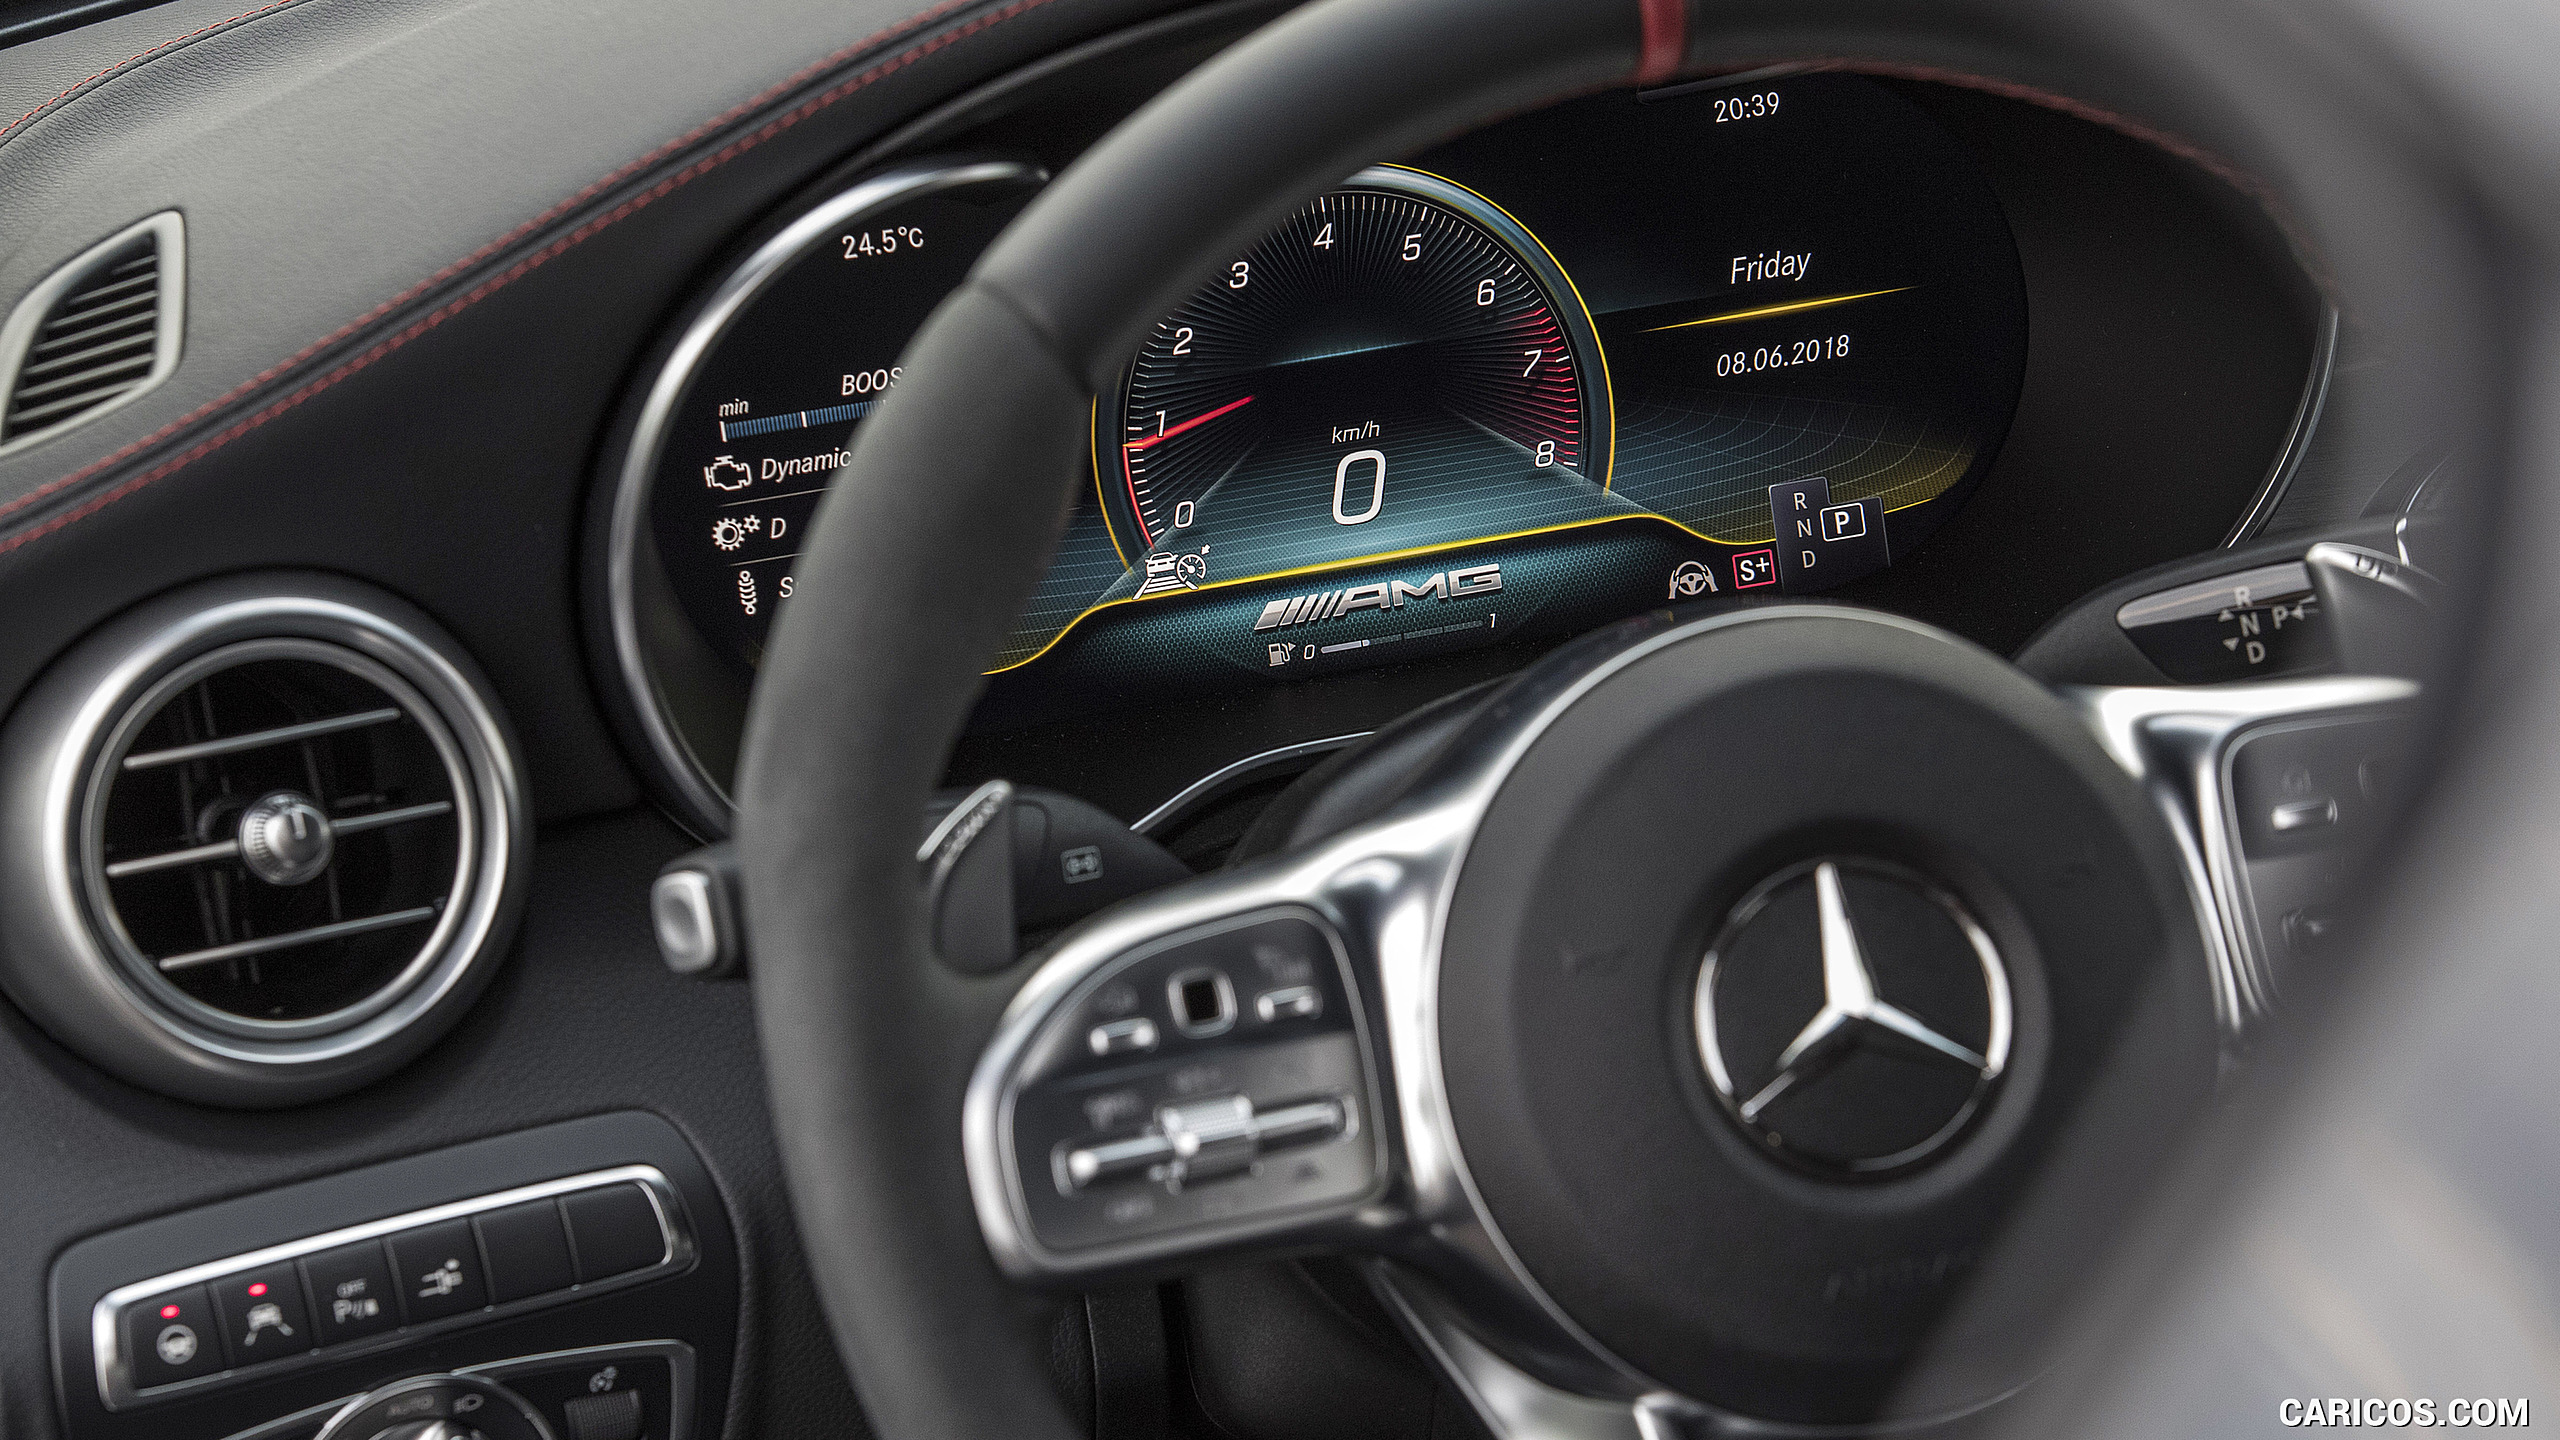 2019 Mercedes-AMG C43 4MATIC Coupe - Interior, Detail, #93 of 184